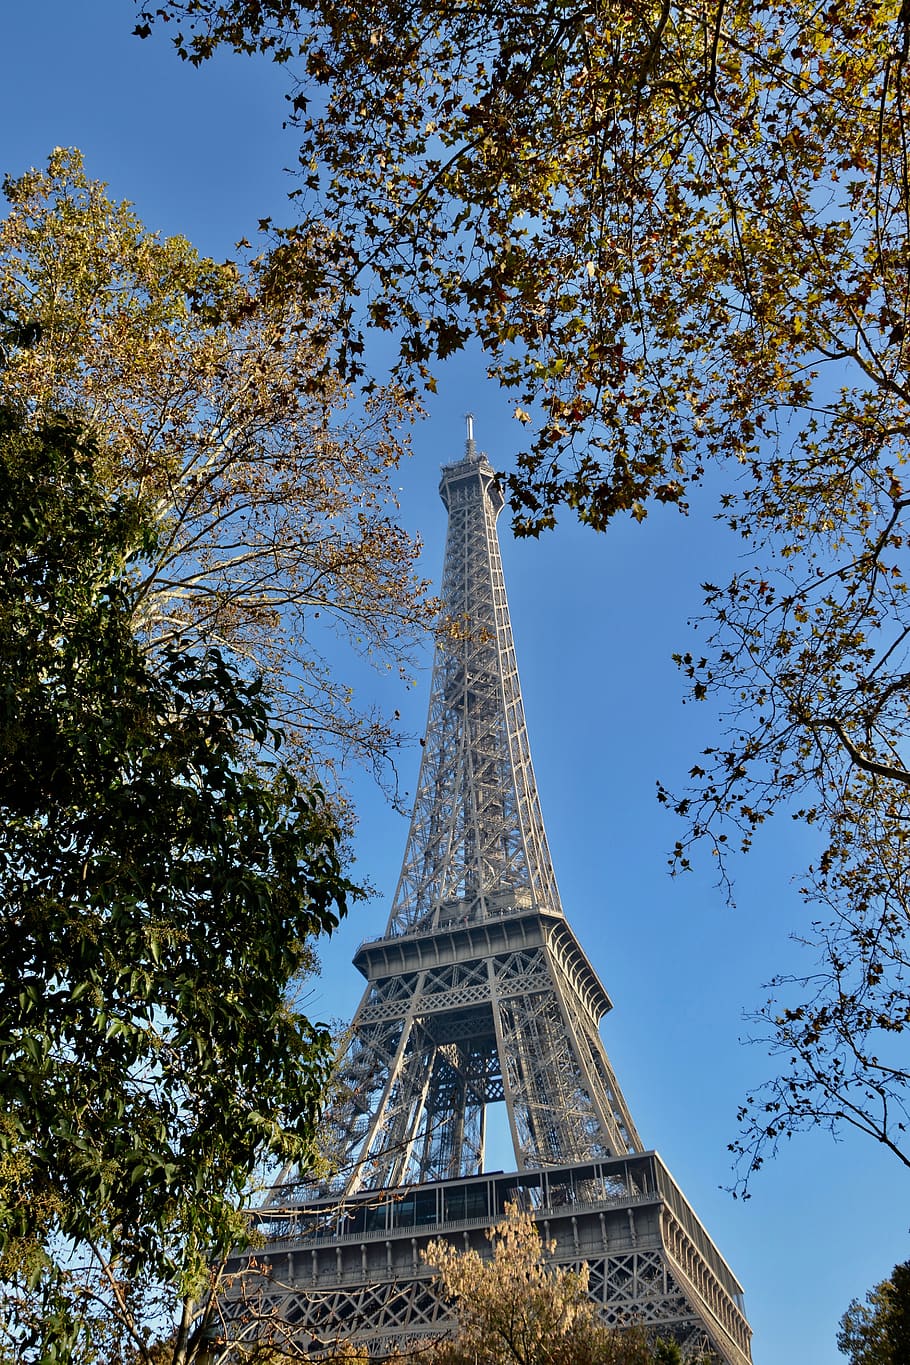 eiffel tower, paris is the capital of french, monument, heritage, city of paris, architecture, culture, europe, gustave eiffel, blue sky